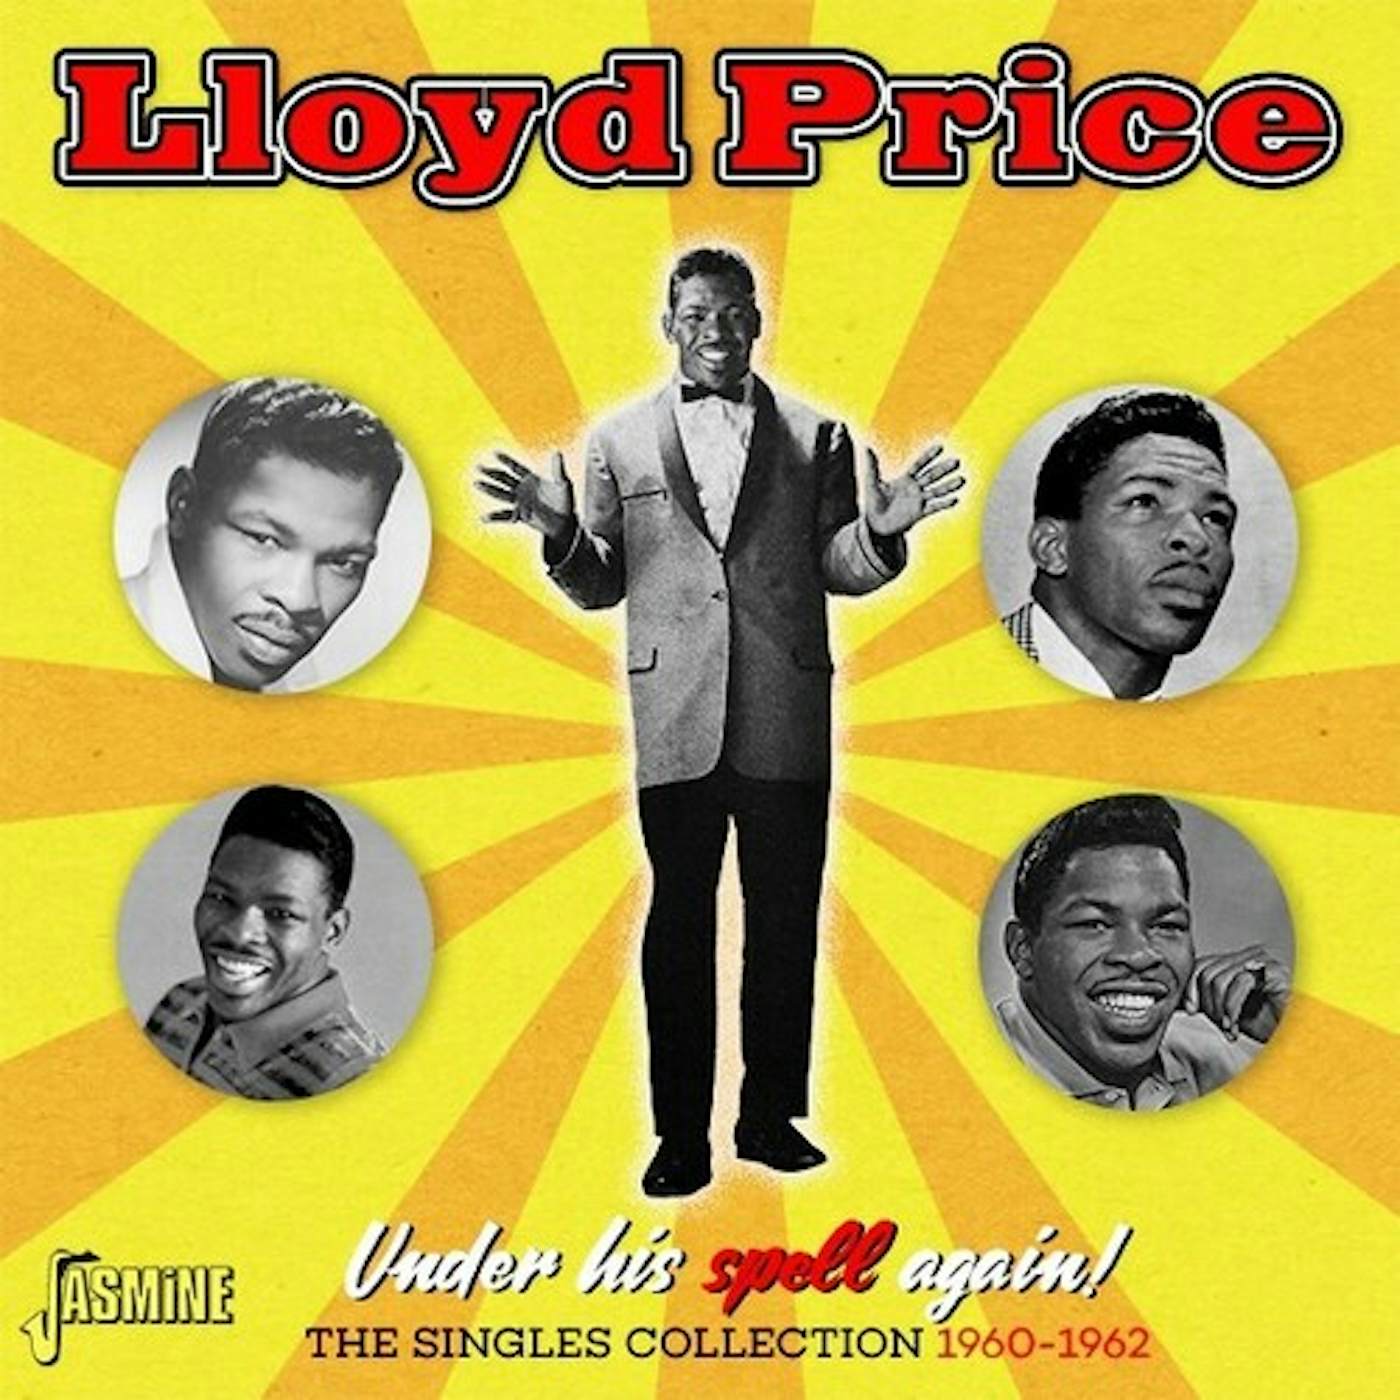 Lloyd Price UNDER HIS SPELL AGAIN: SINGLES COLLECTION 1960-62 CD